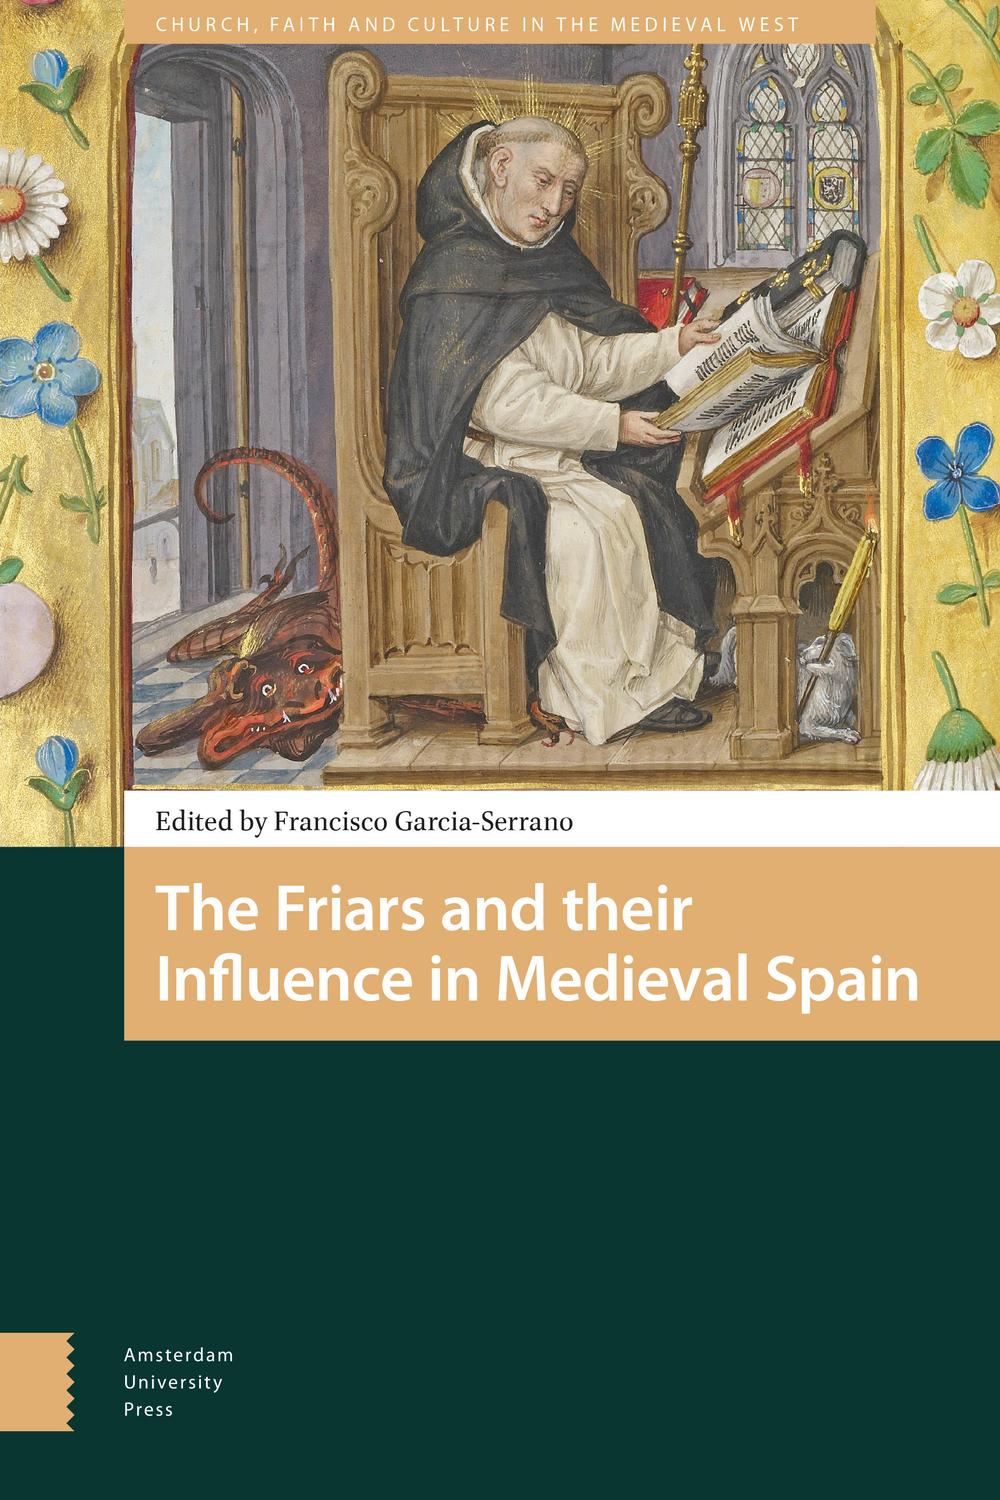 The Friars and their Influence in Medieval Spain - Francisco Garcia-Serrano